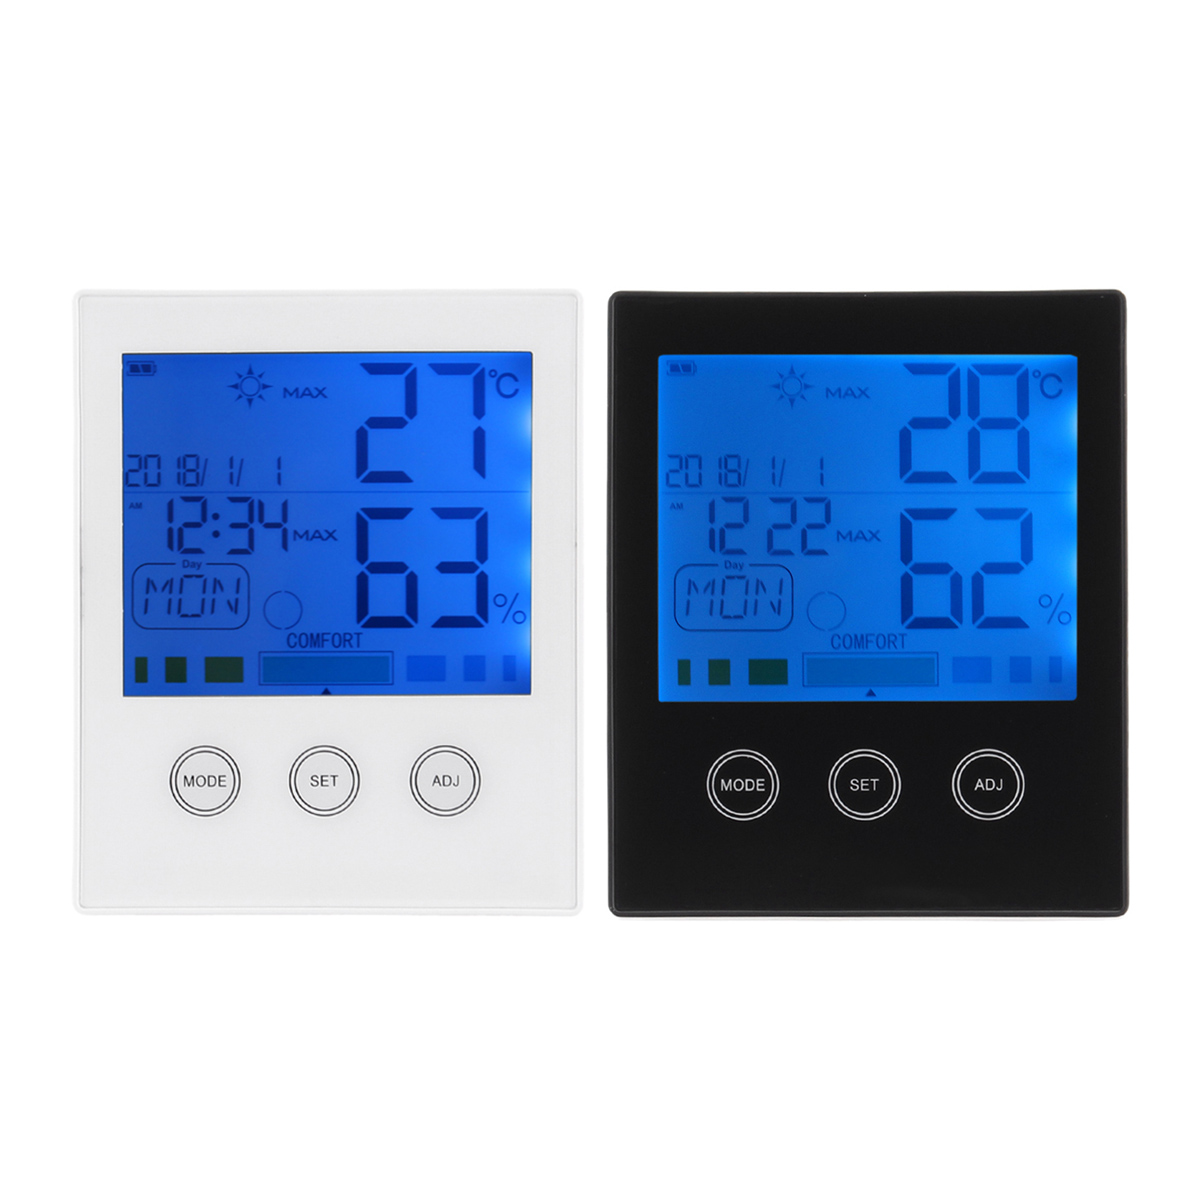 CH-909-Large-LCD-Digital-Thermometer-Hygrometer-Temperature-Humidity-Gauge-Alarm-Clock-Thermometer-1335367-7